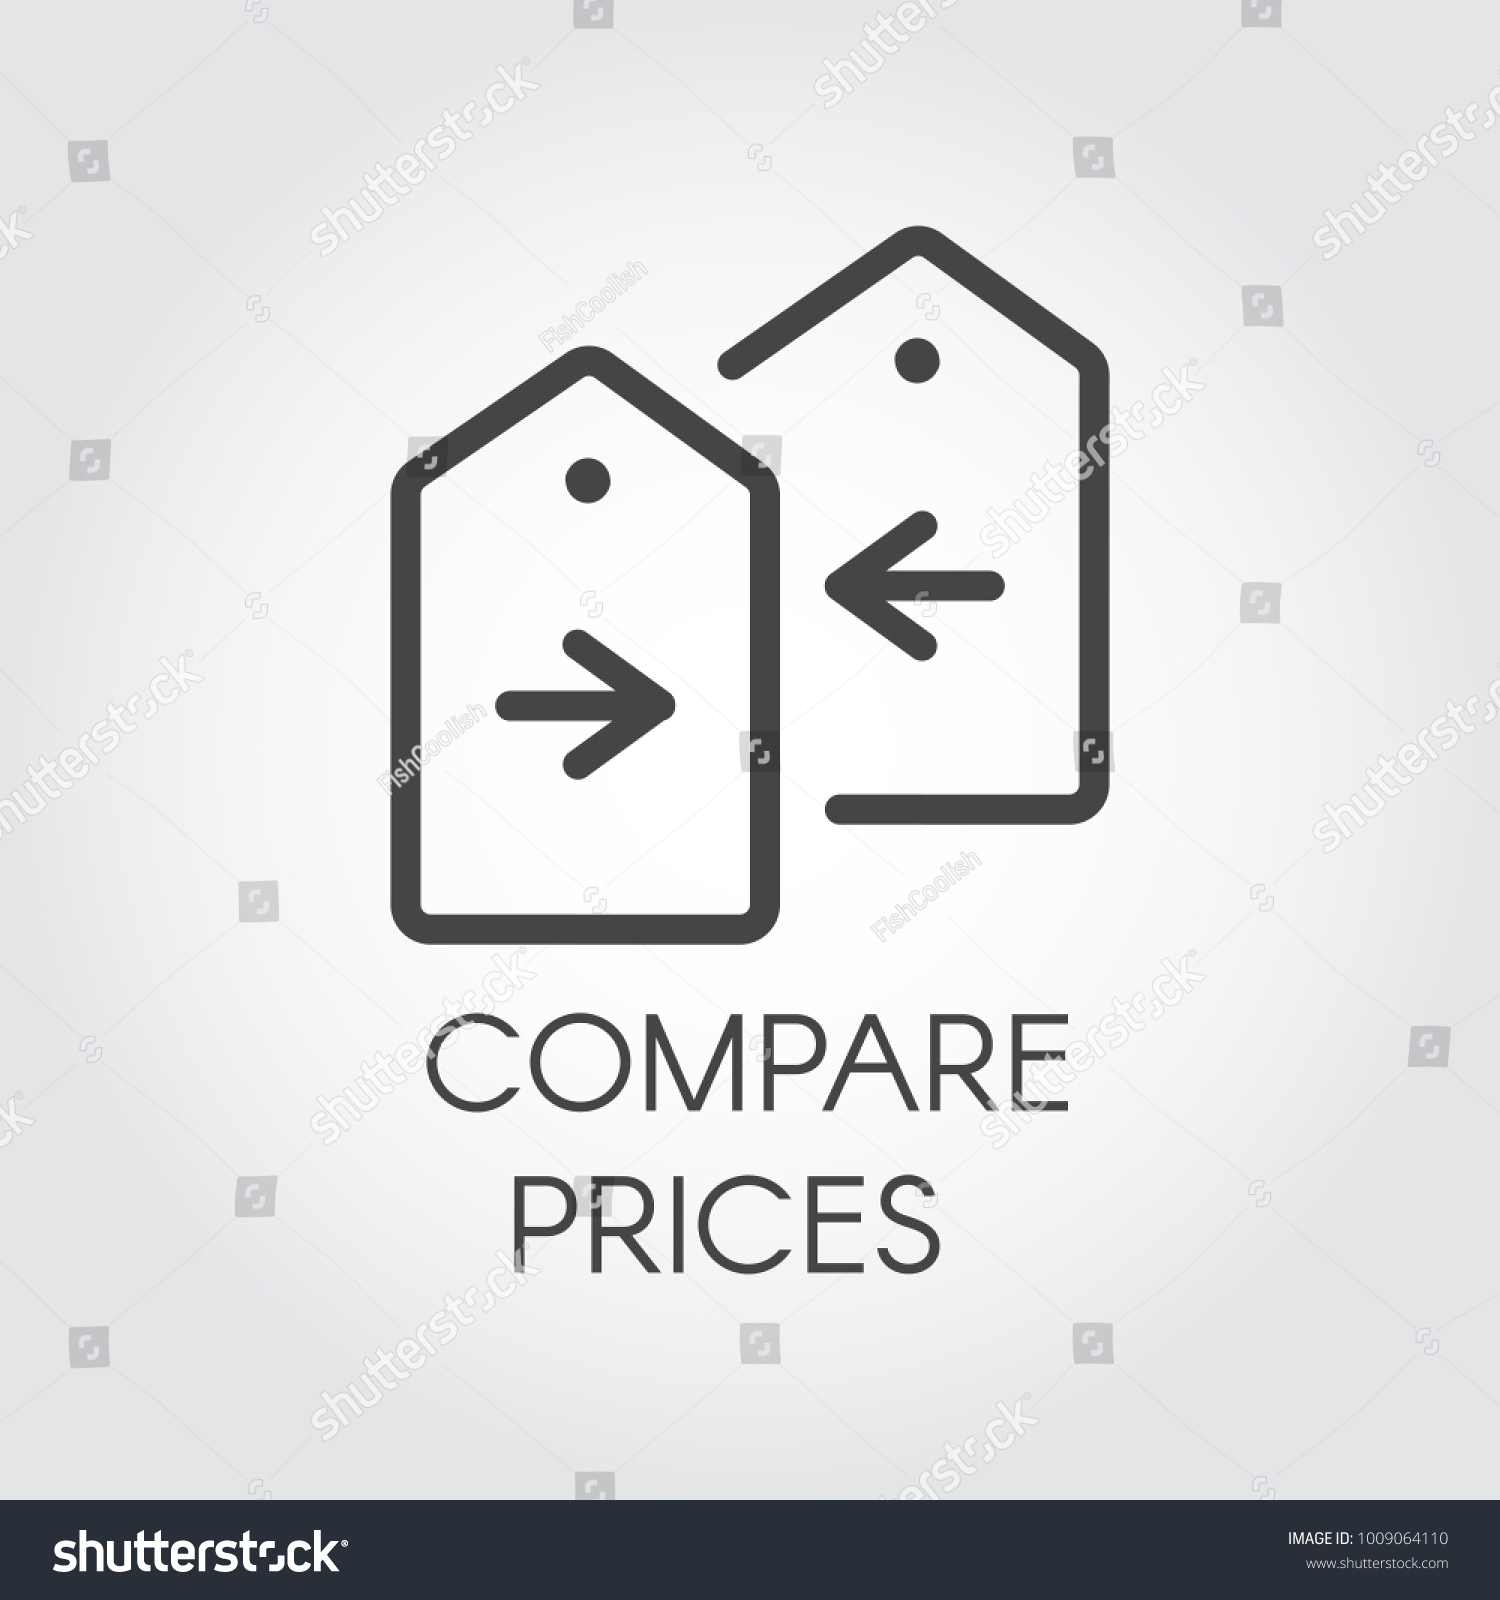 Compare prices icon drawing in line design. Financial comparison outline pictogram. Price-tag with arrow label. Shoosing the best offer concept emblem. Vector illustration #1009064110